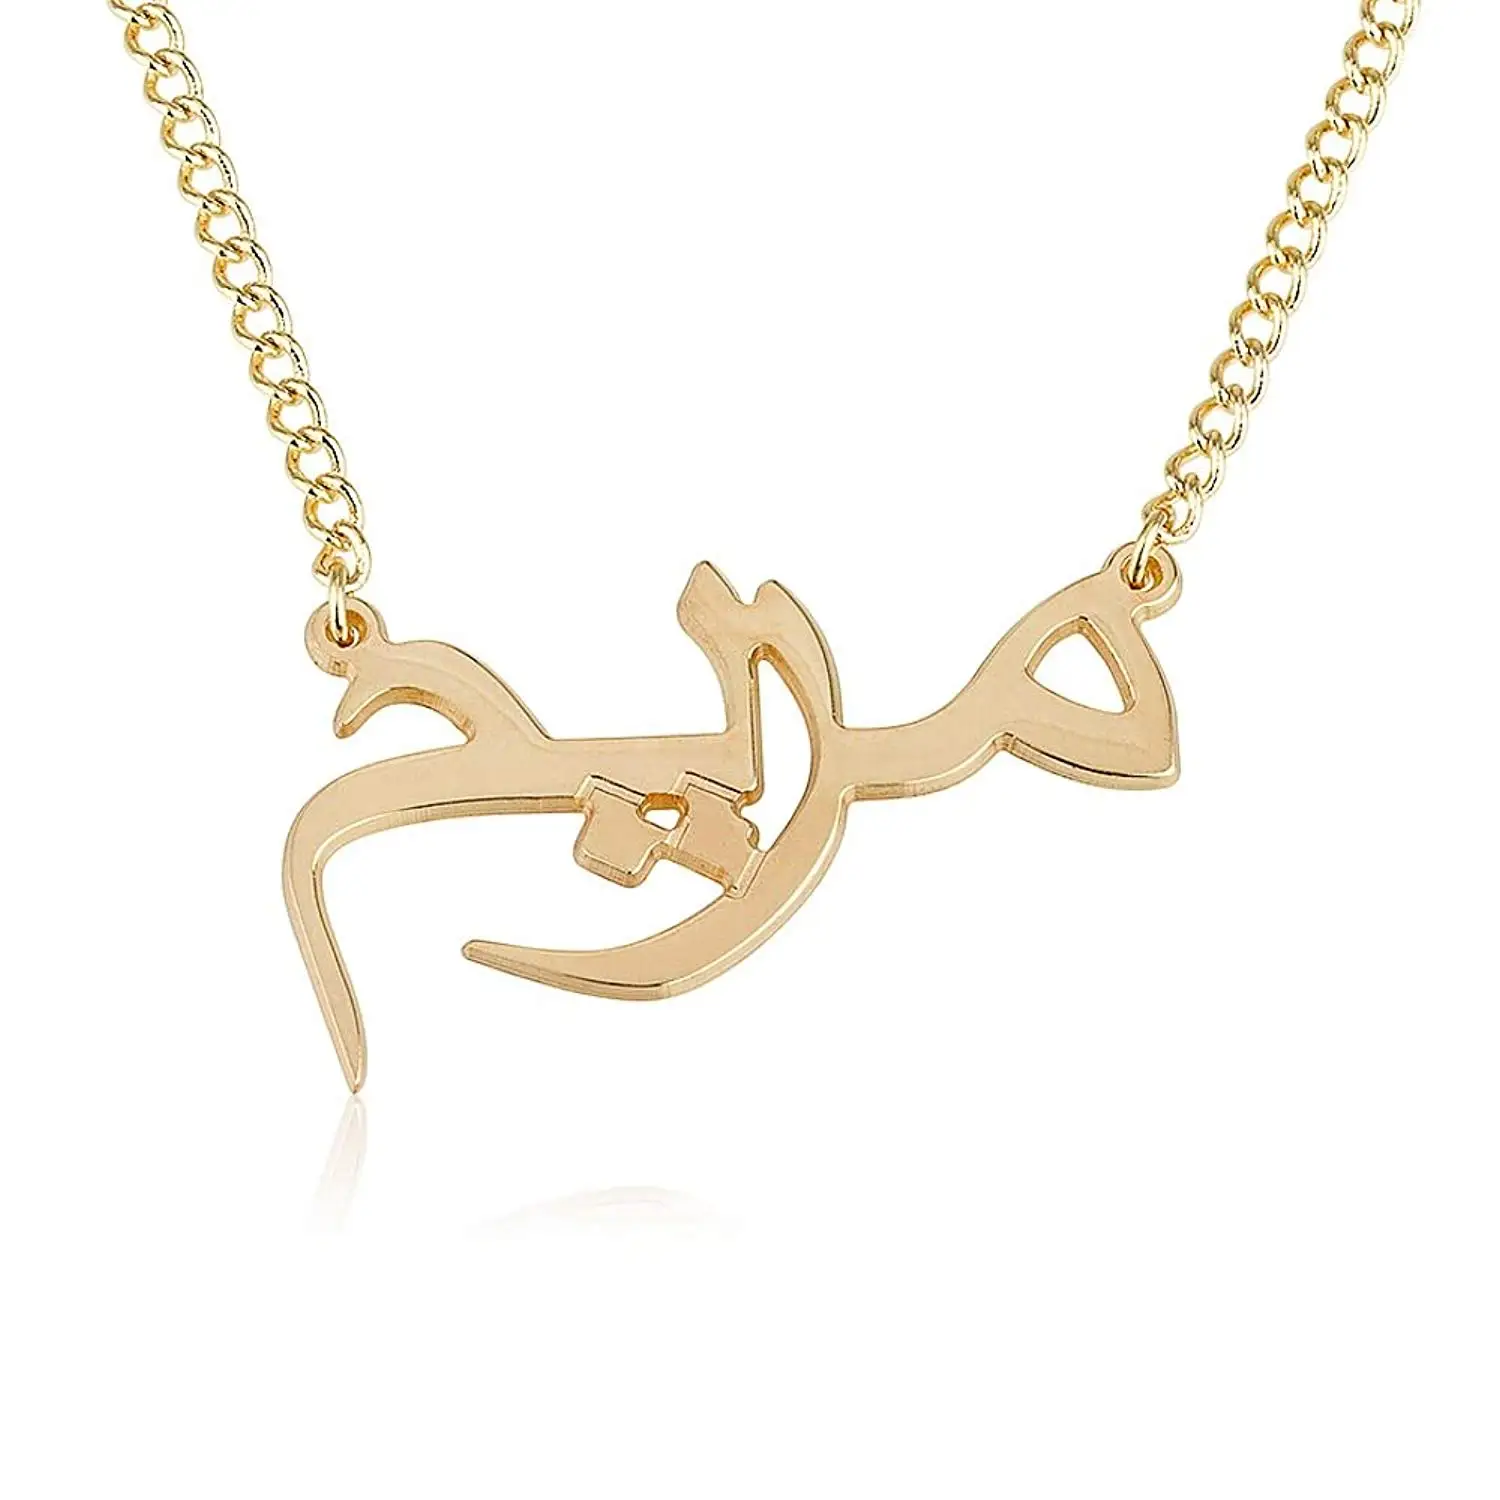 Cheap Arabic Name Necklace Find Arabic Name Necklace Deals On Line At Alibaba Com